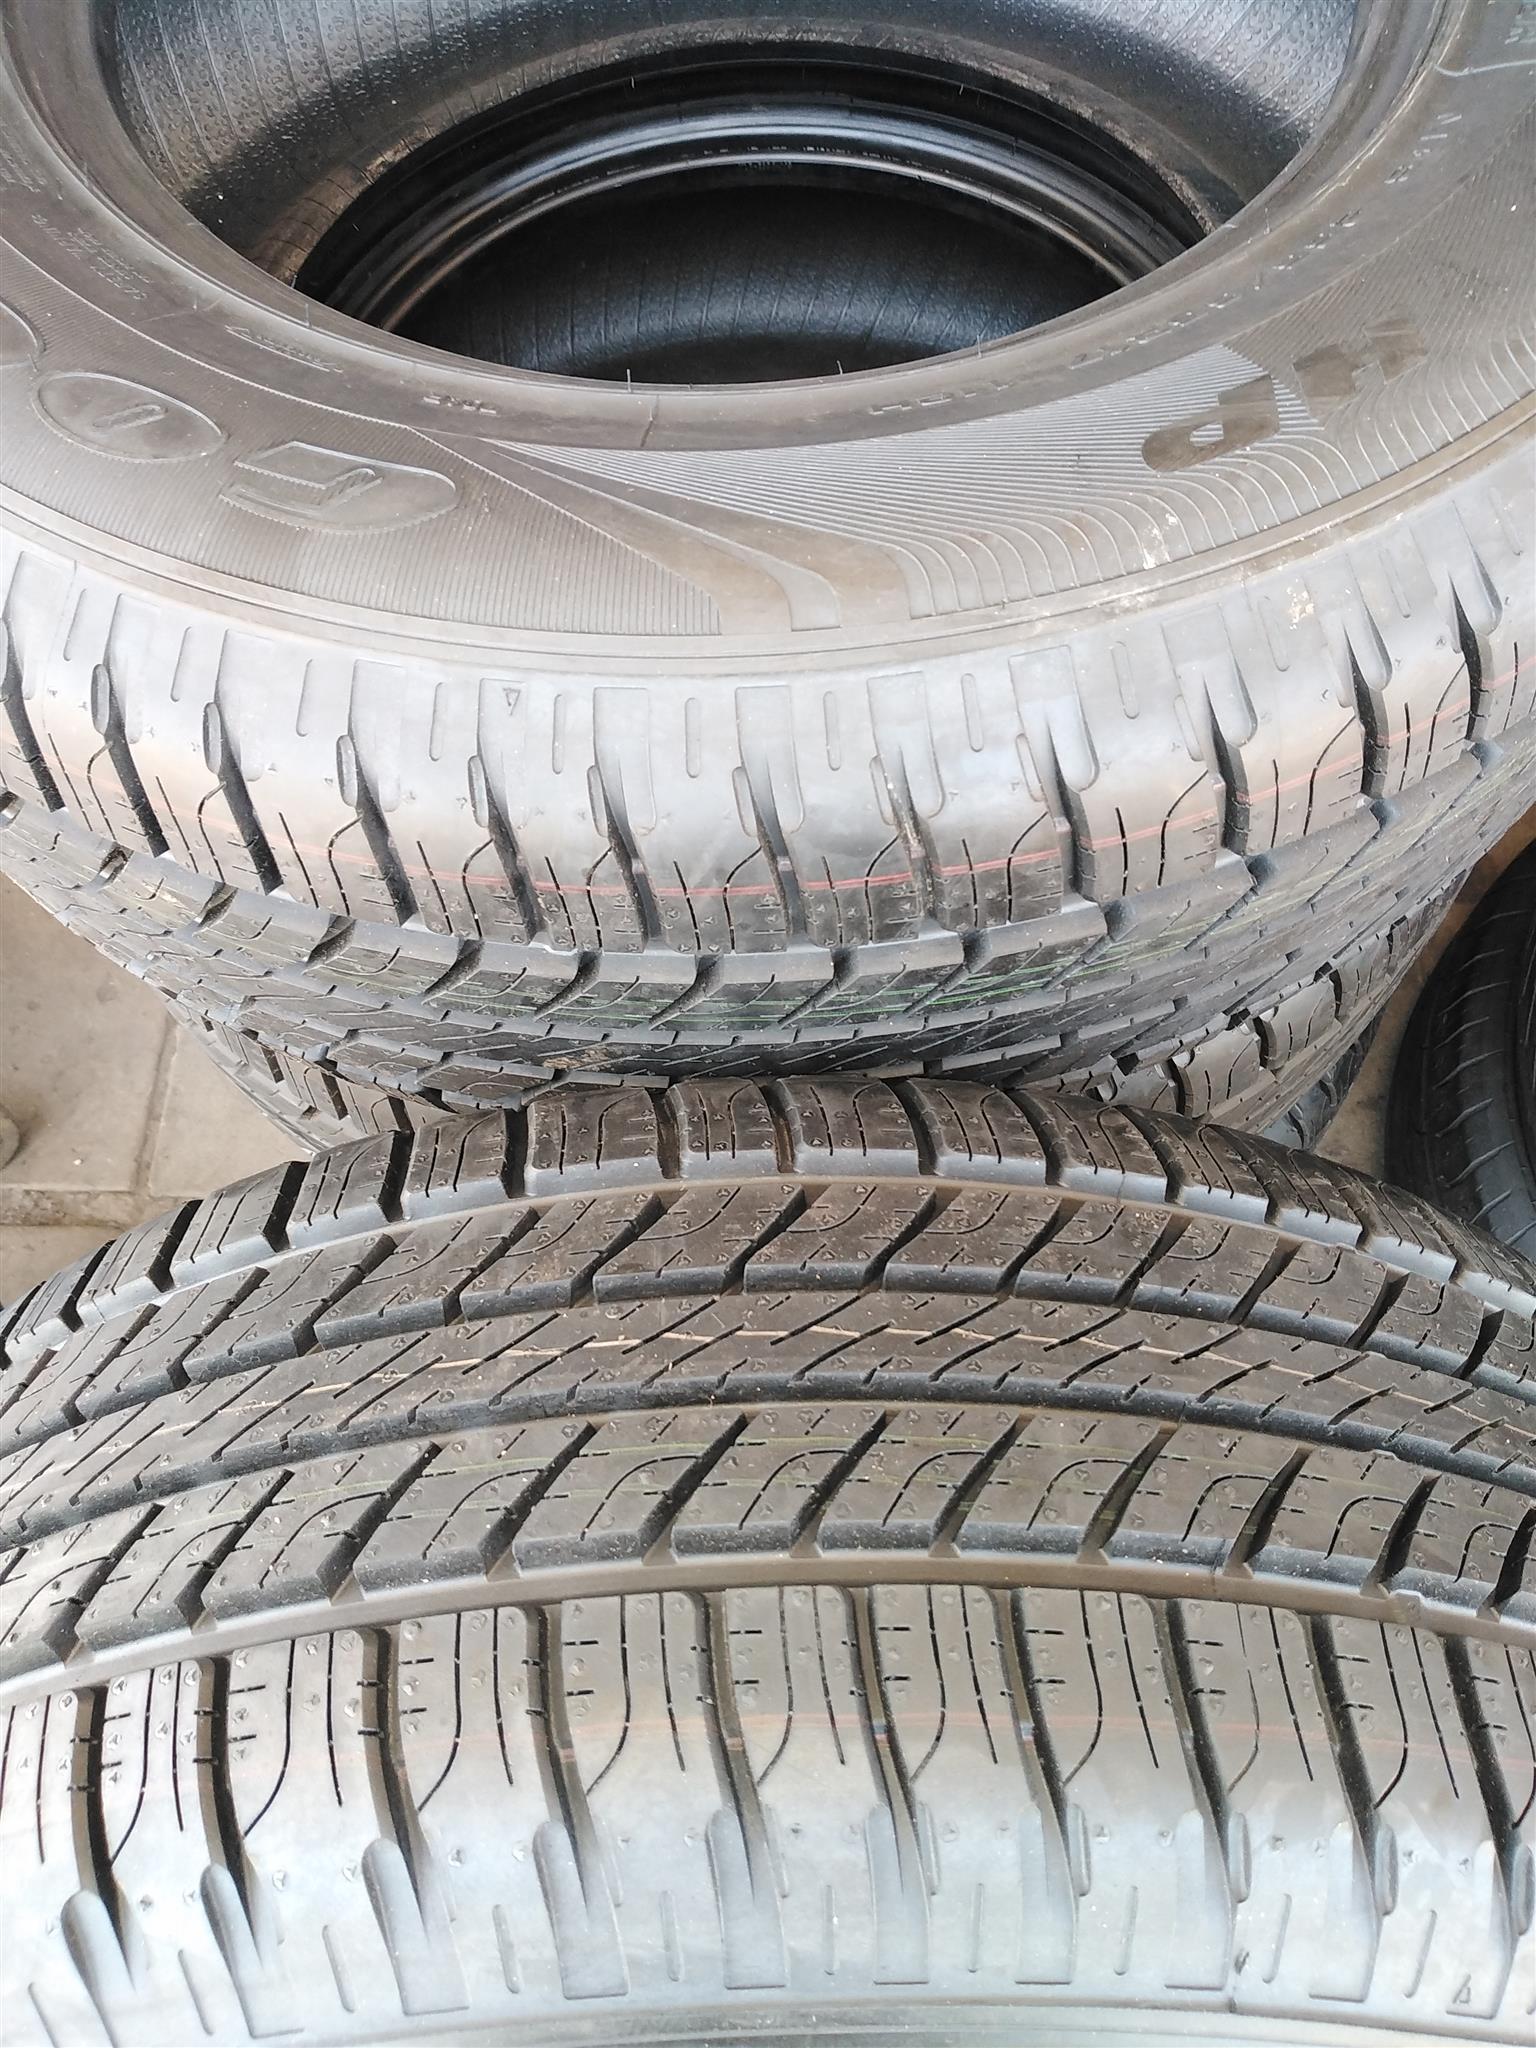 265/65/17 Goodyear wrangler hp tyres | Junk Mail